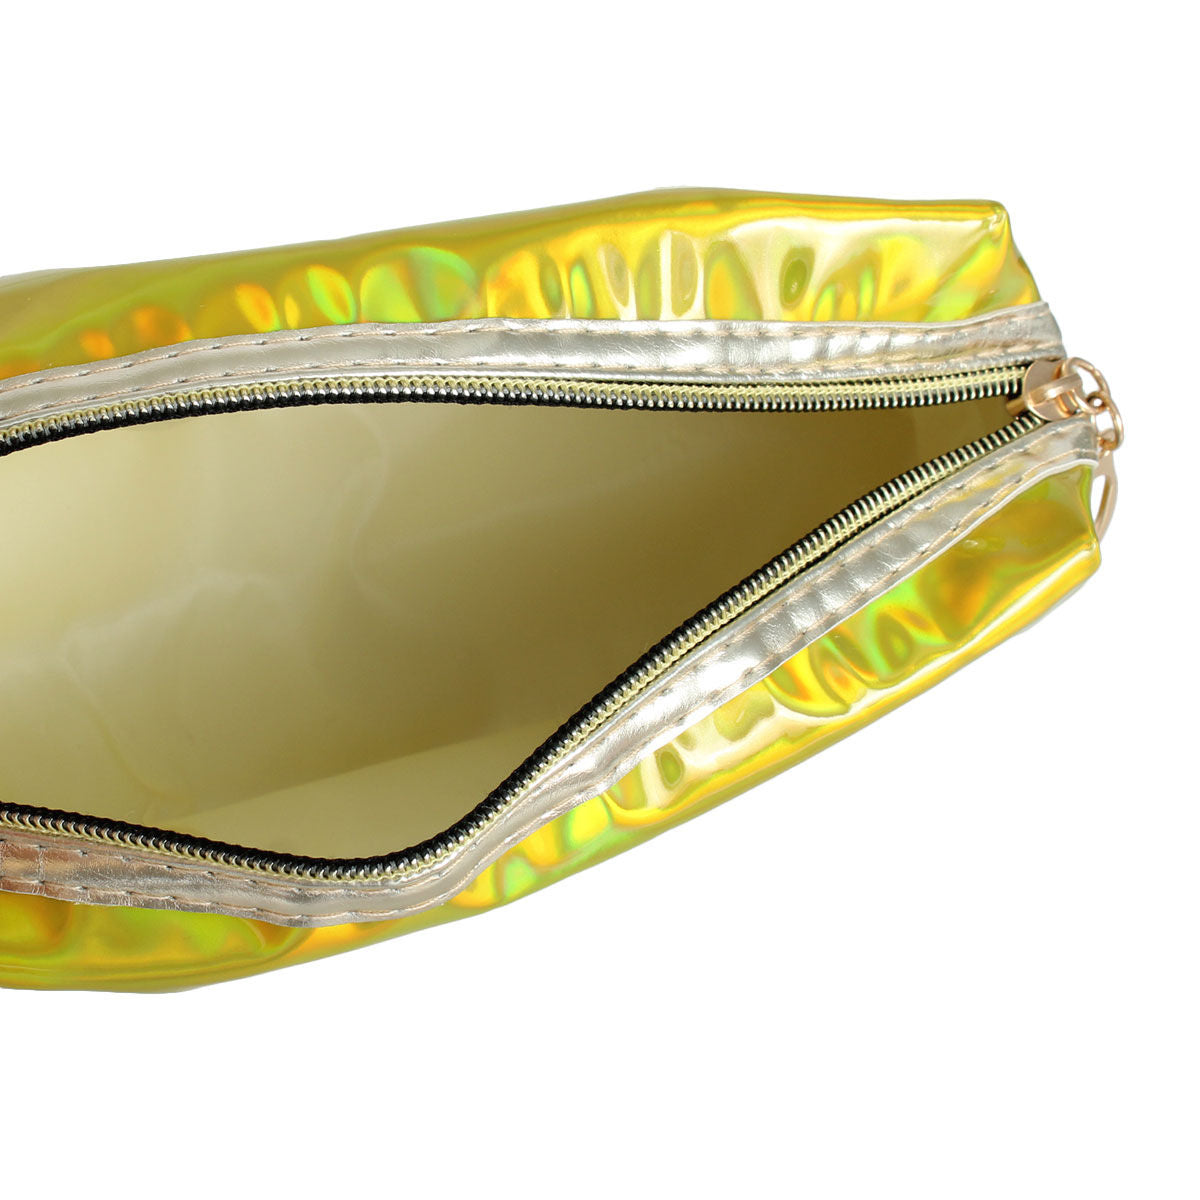 Gold Iridescent Rectangle Pouch